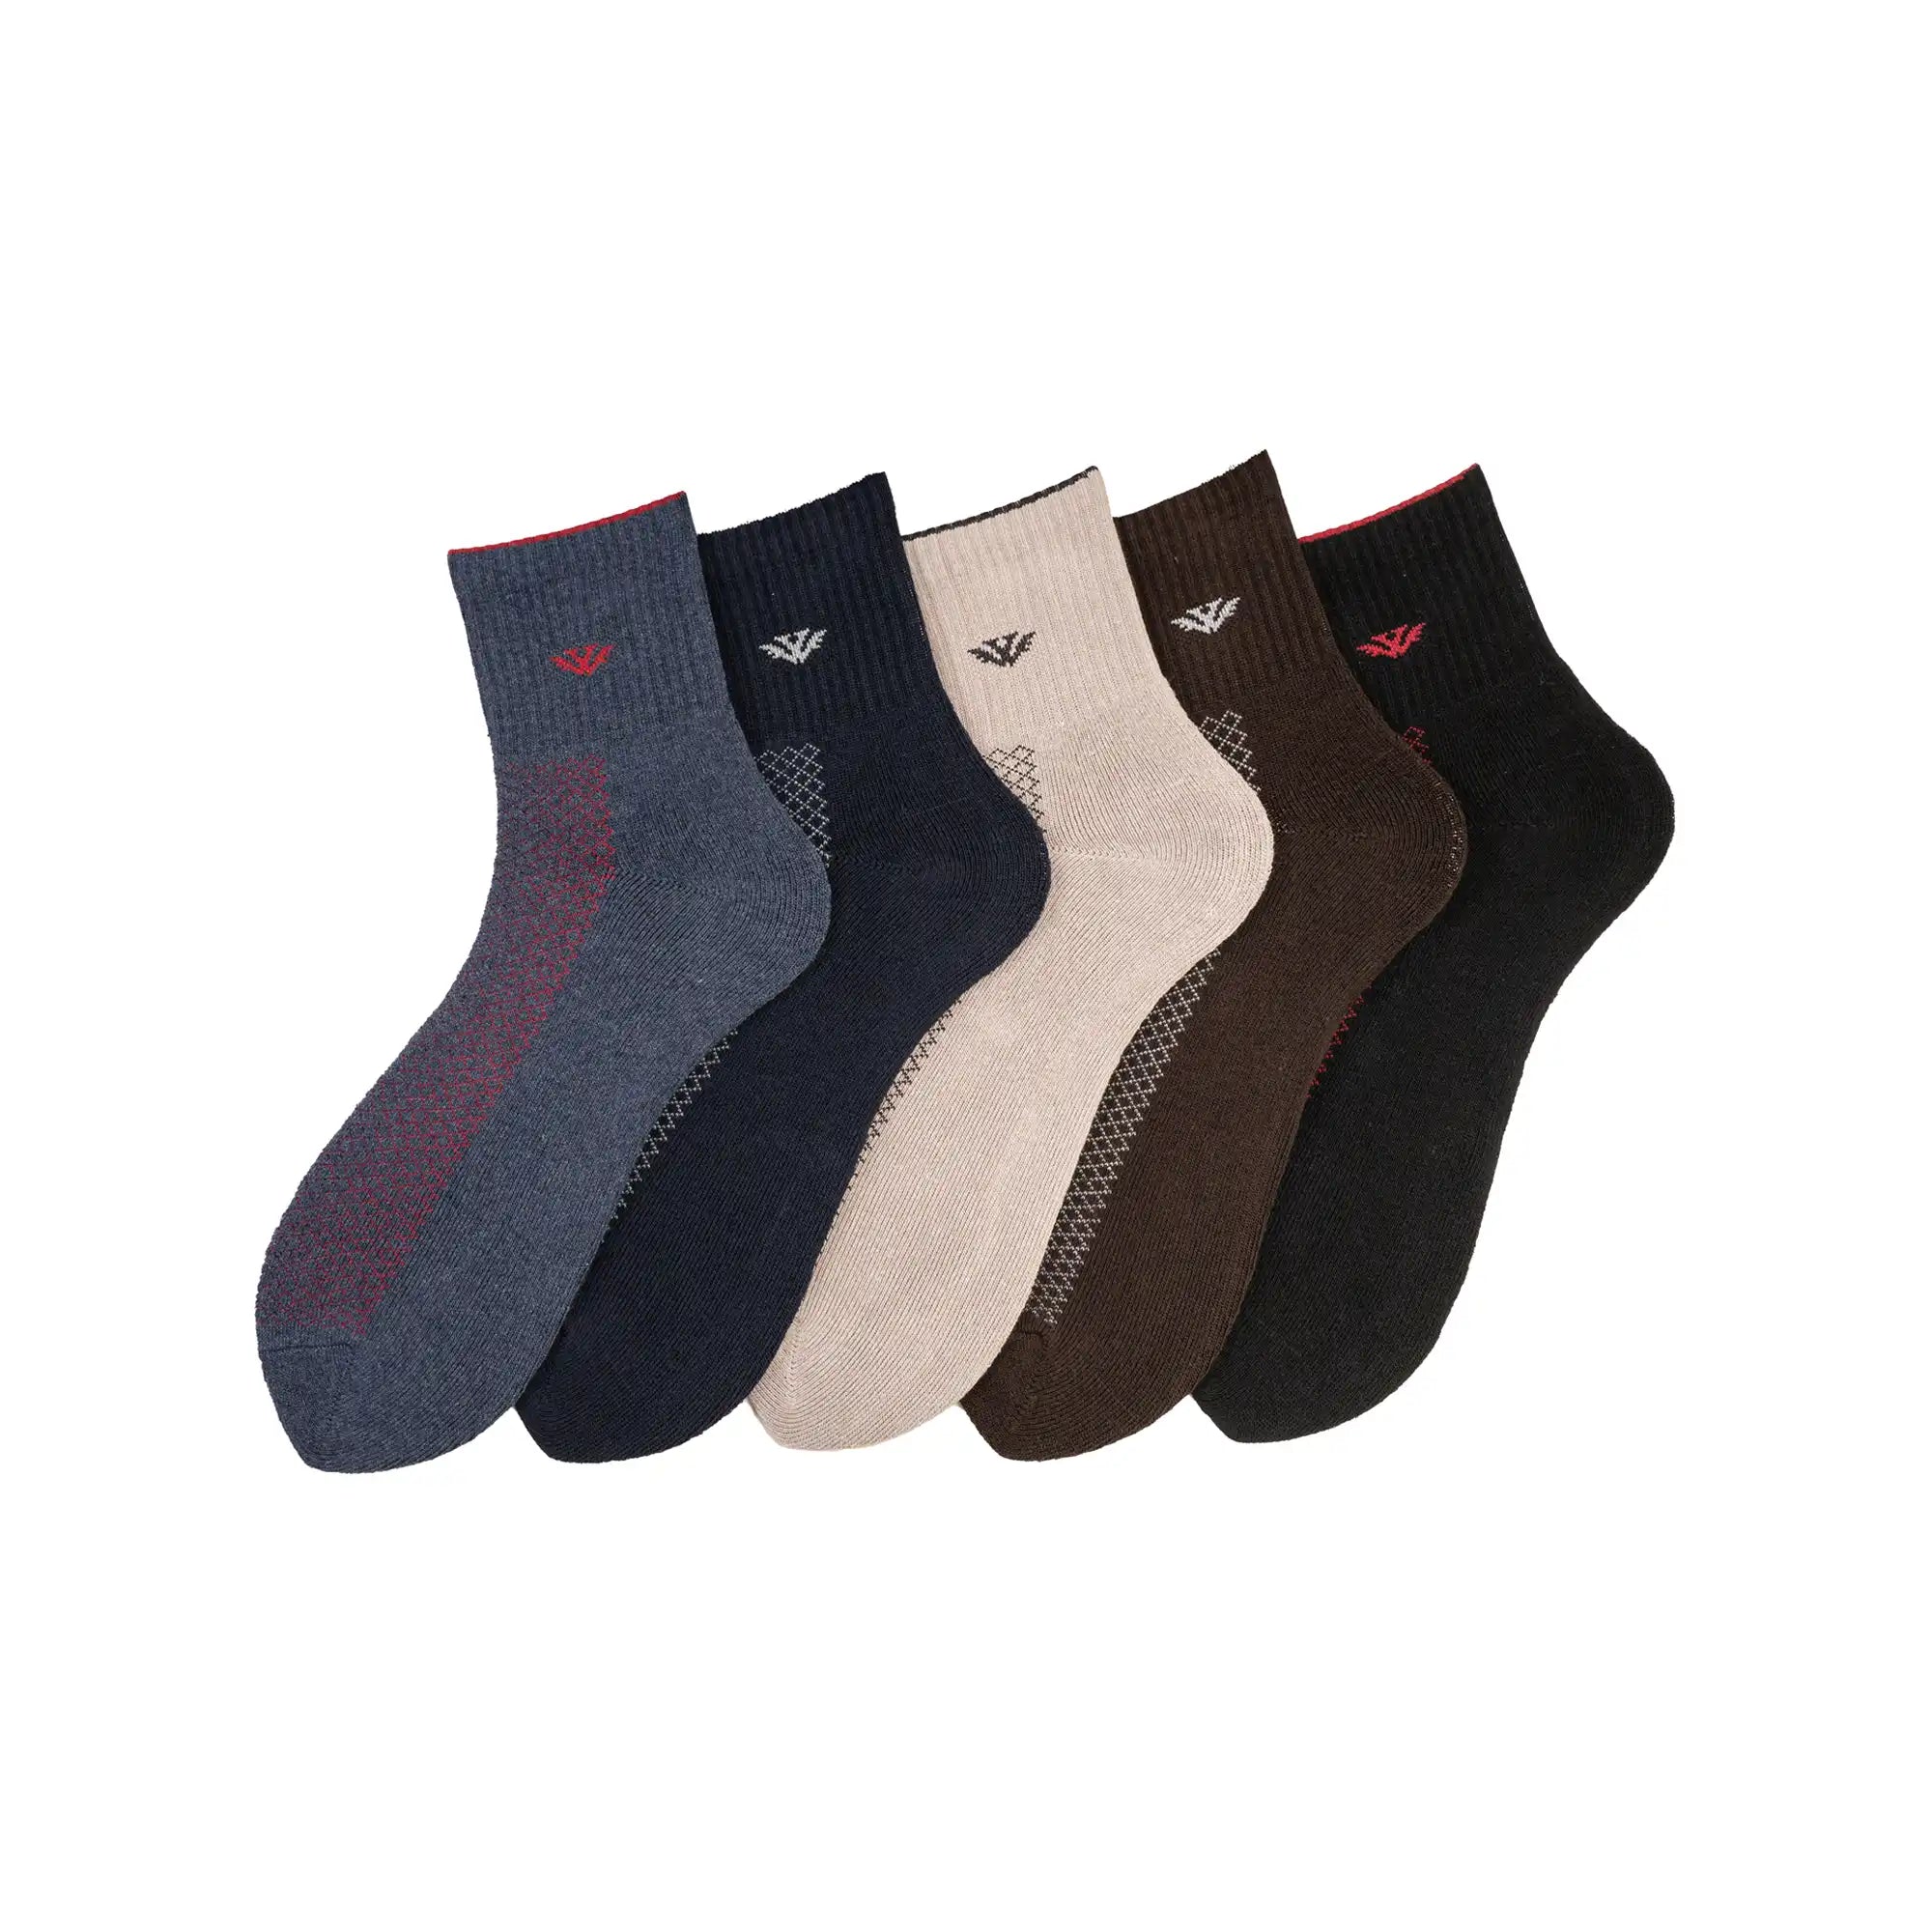 Young Wings Men's Multi Colour Cotton Fabric Design Ankle Length Socks - Pack of 3, Style no. M1-2118 N